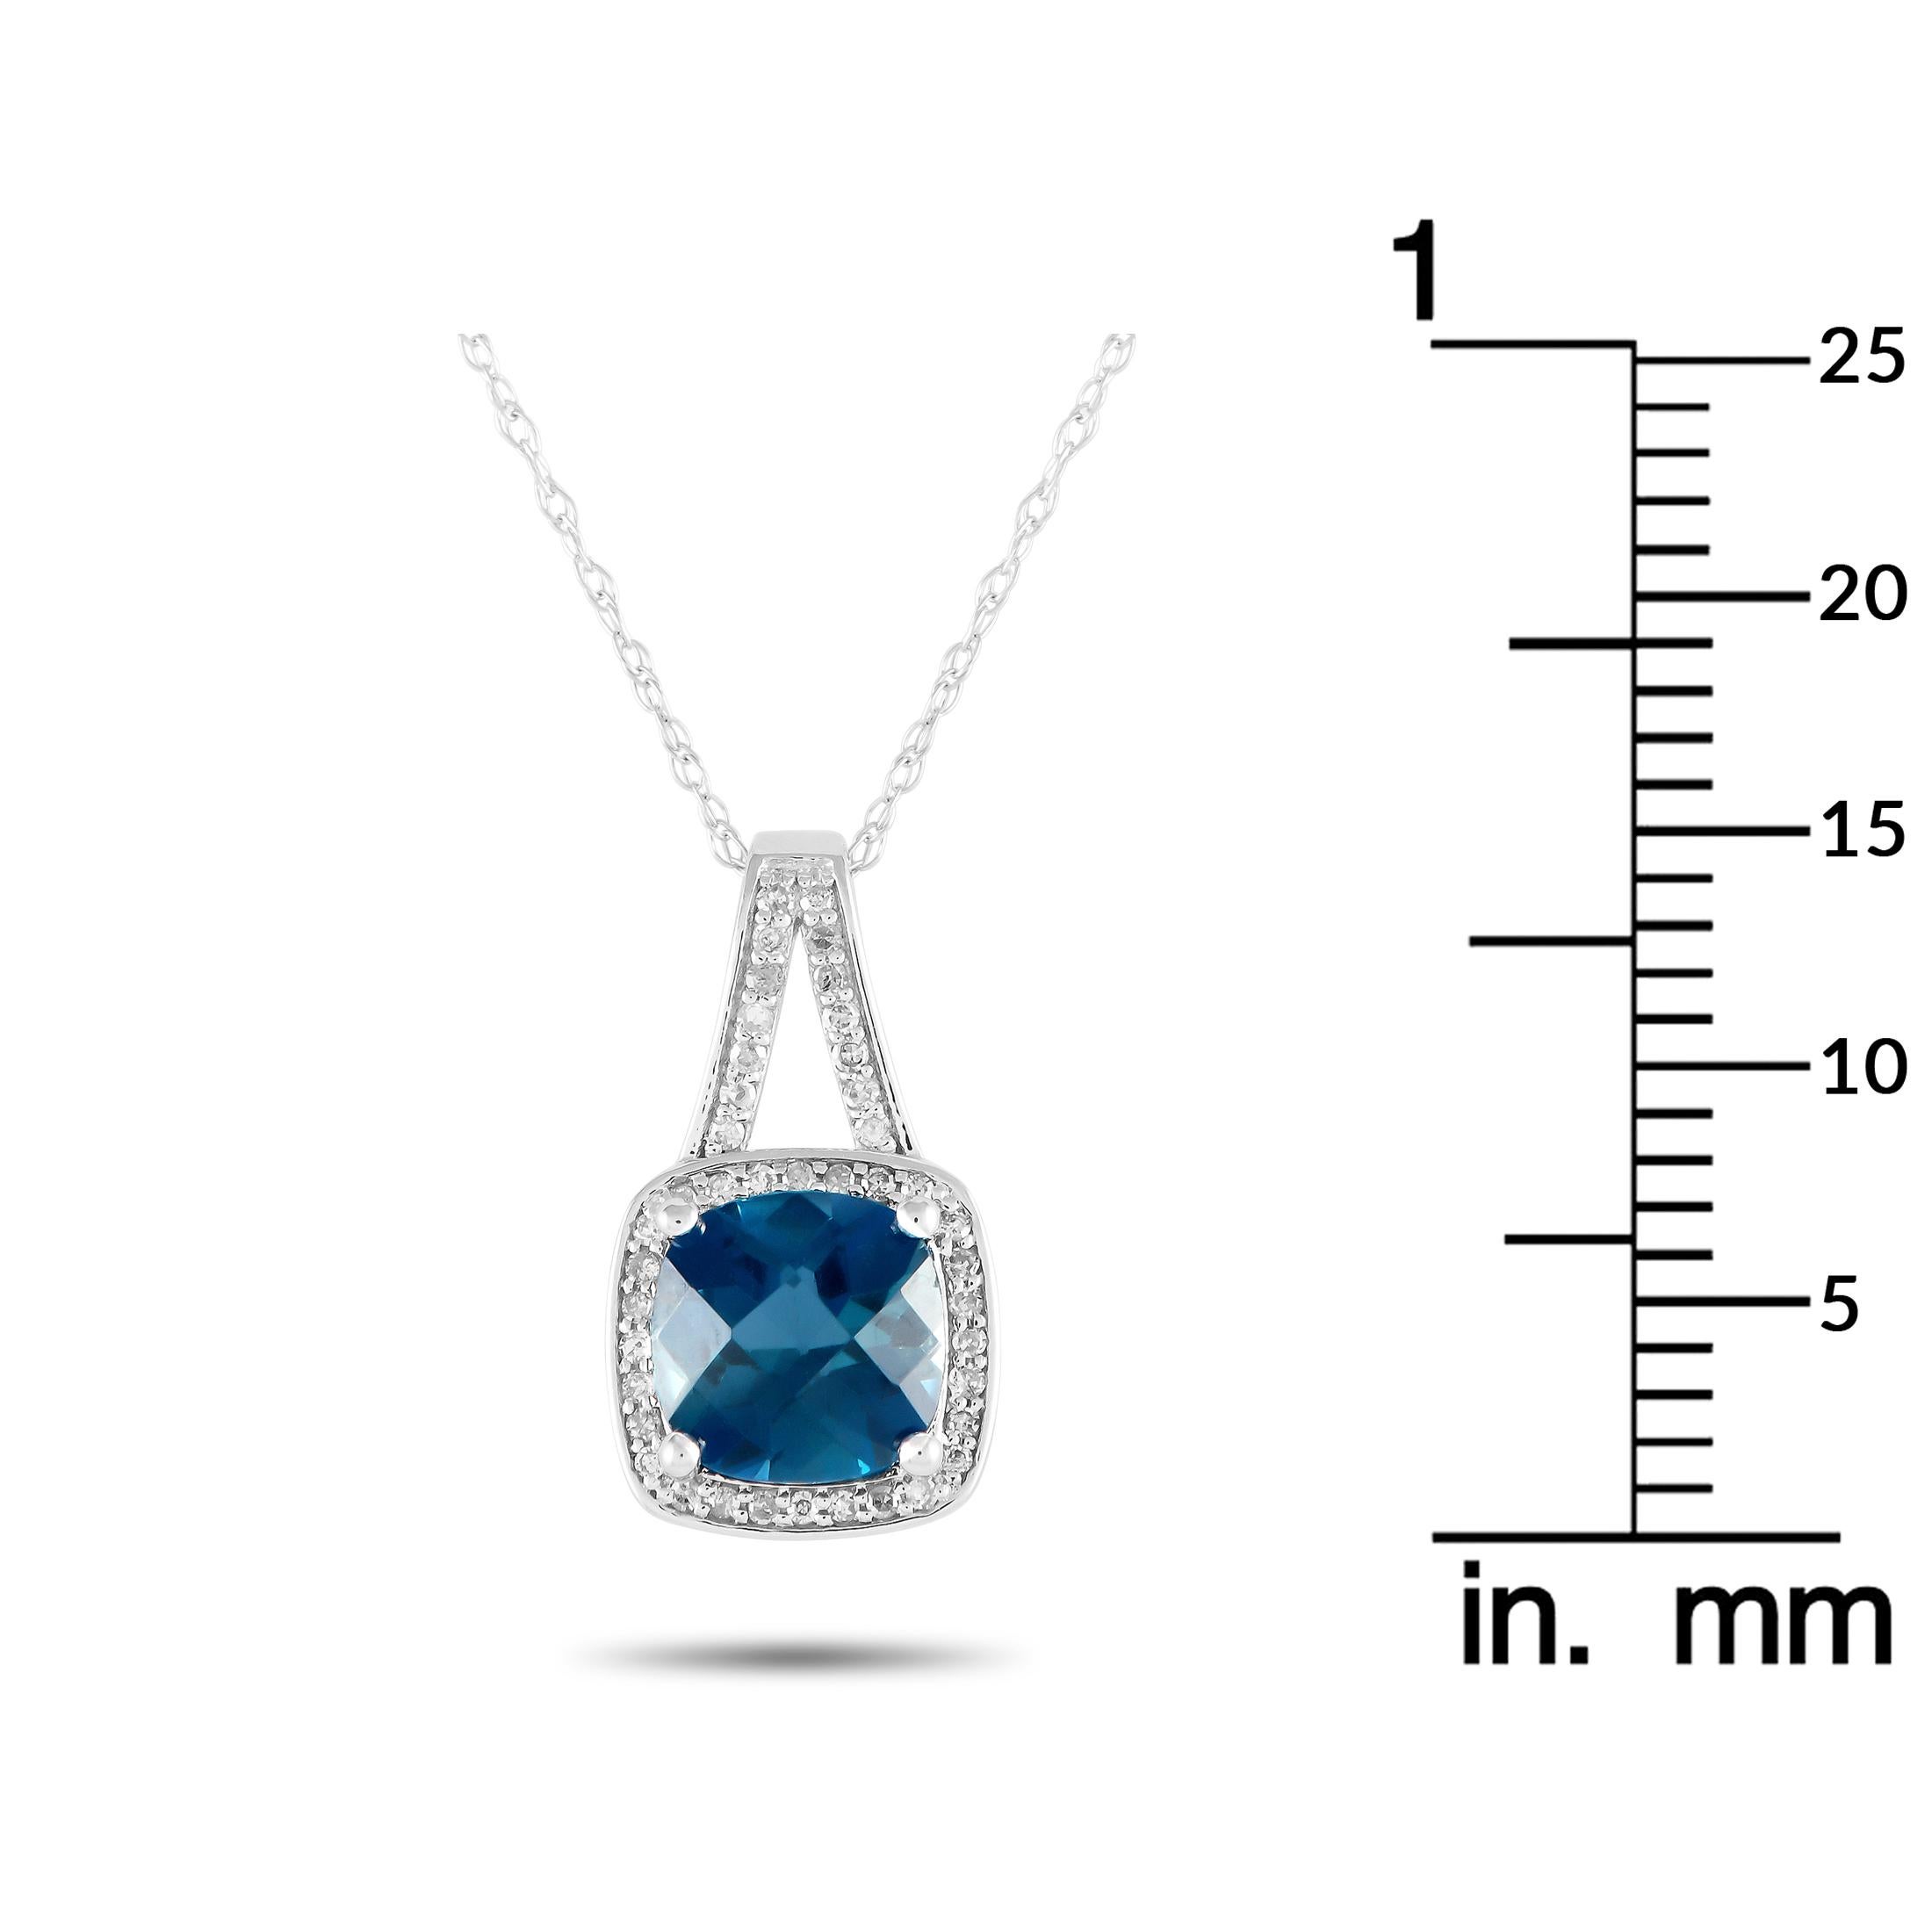 LB Exclusive 14K White Gold 0.12ct Diamond and Blue Topaz Necklace PD4-16273WBT In New Condition For Sale In Southampton, PA